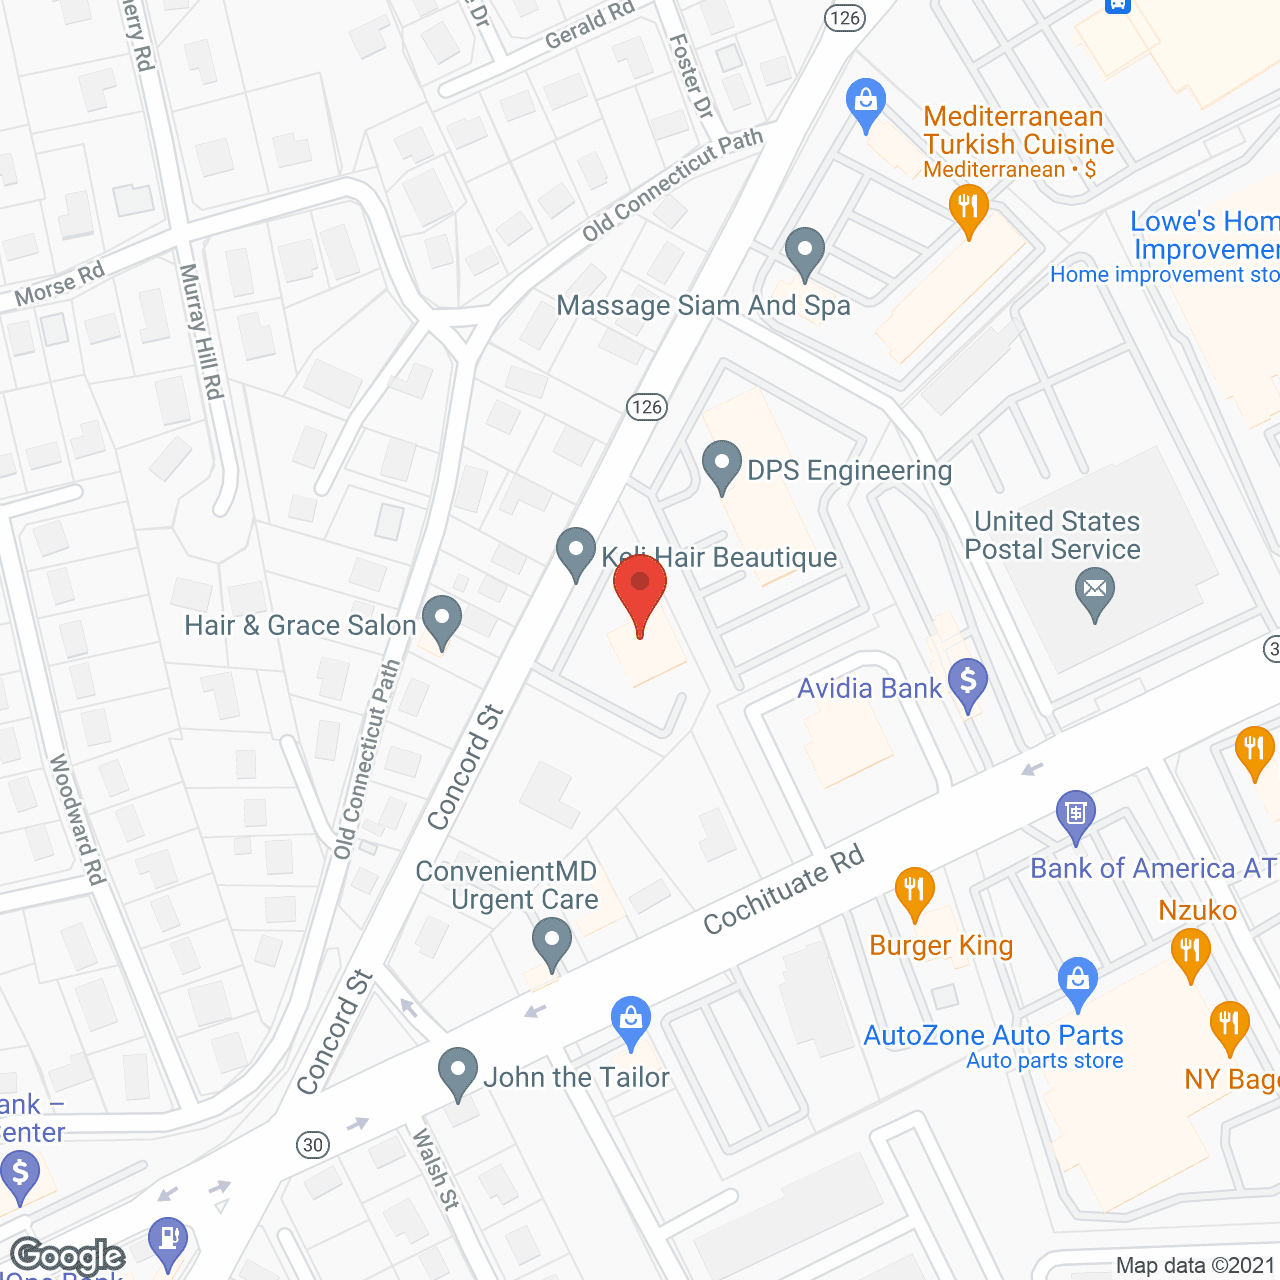 American Express Retirement in google map